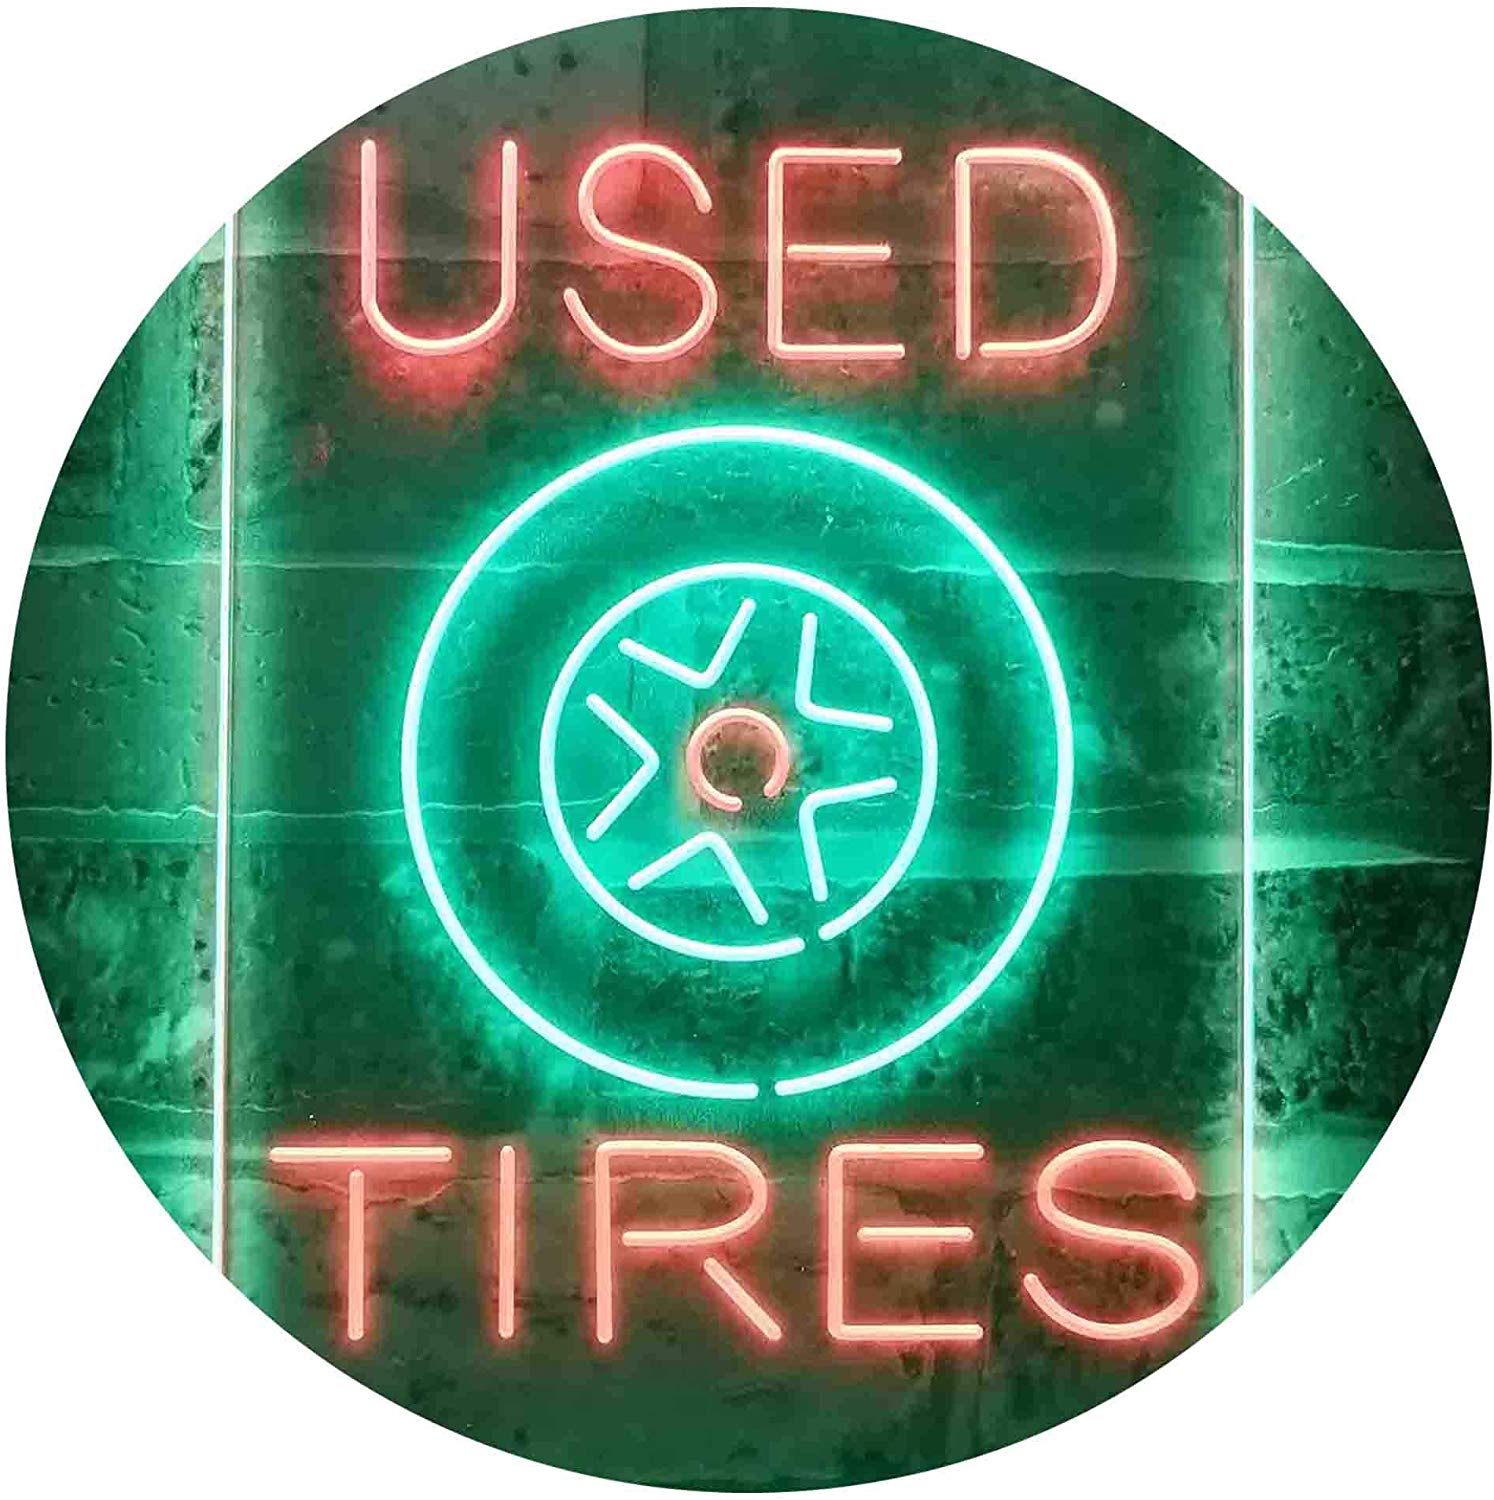 Auto Shop Car Garage Used Tires LED Neon Light Sign - Way Up Gifts